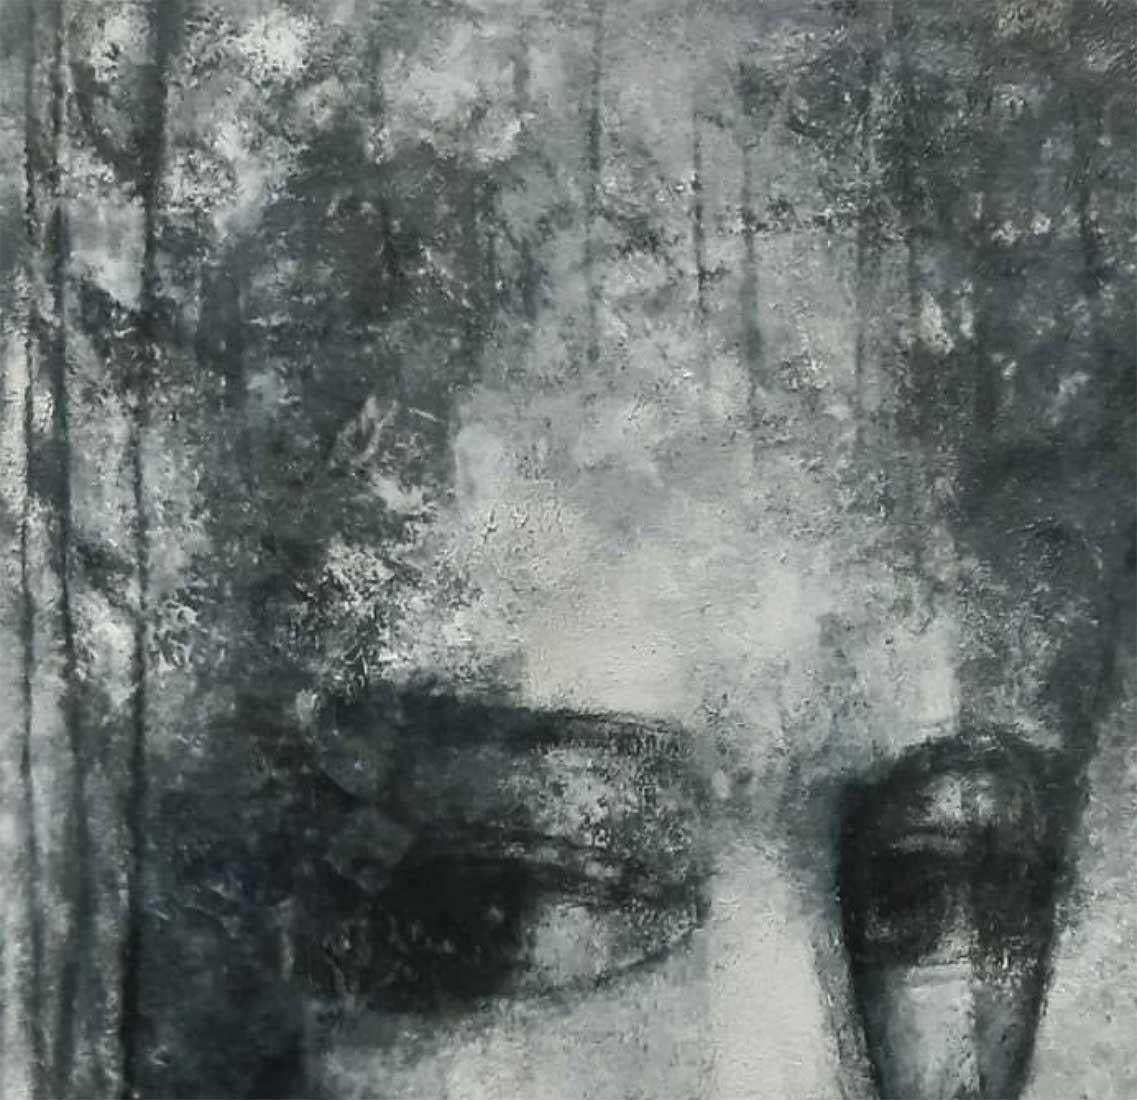 Women, Face, Charcoal on Canvas, Black & White by Indian Artist 